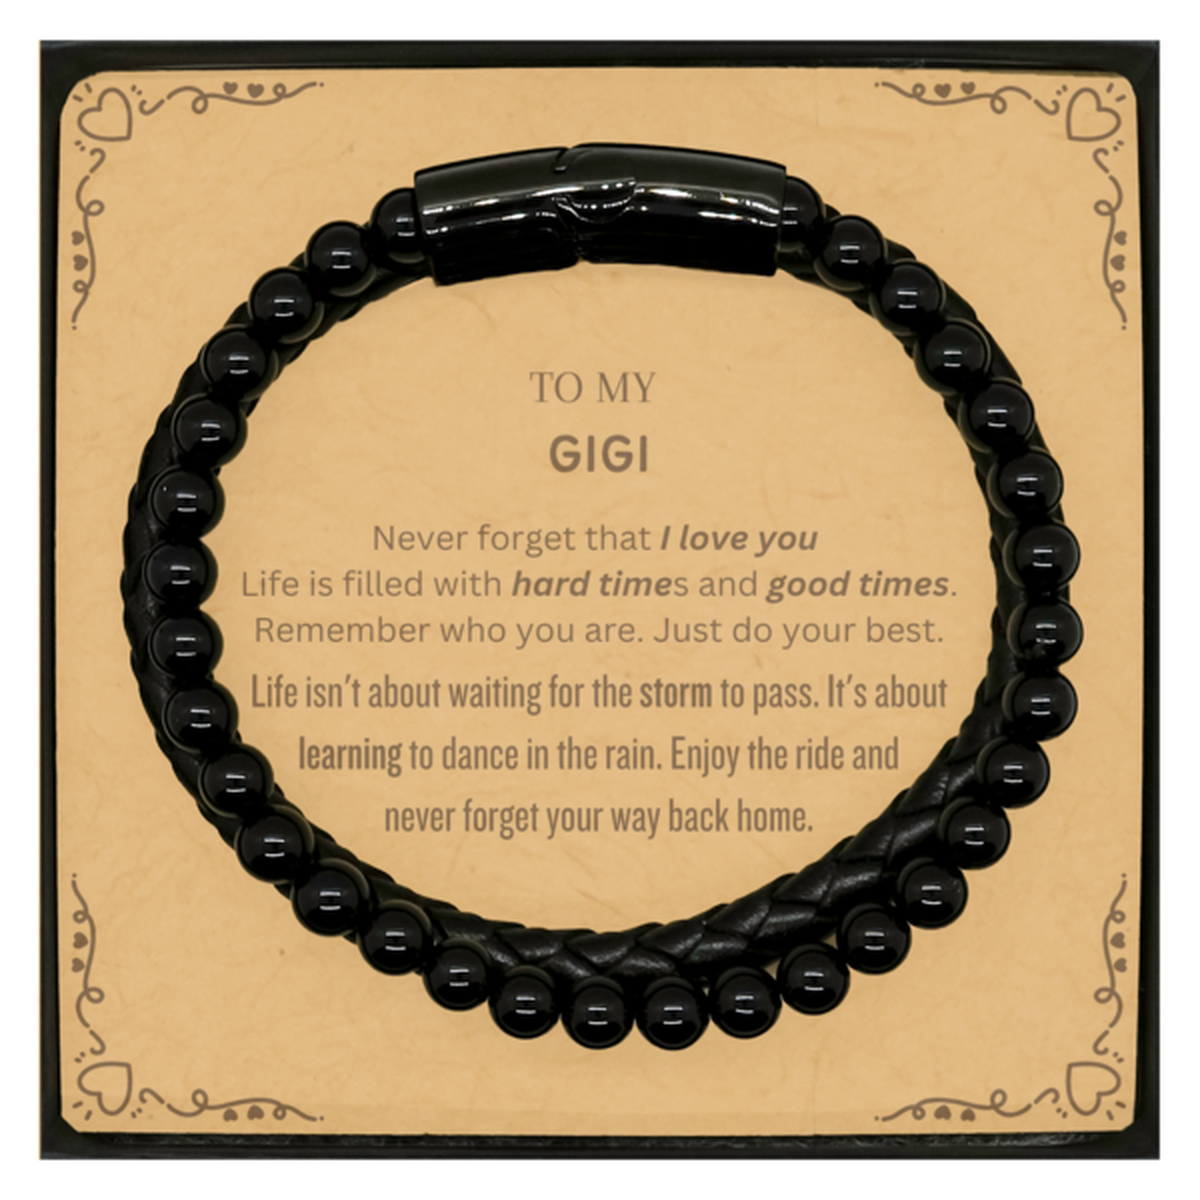 Christmas Gigi Stone Leather Bracelets Gifts, To My Gigi Birthday Thank You Gifts For Gigi, Graduation Unique Gifts For Gigi To My Gigi Never forget that I love you life is filled with hard times and good times. Remember who you are. Just do your best